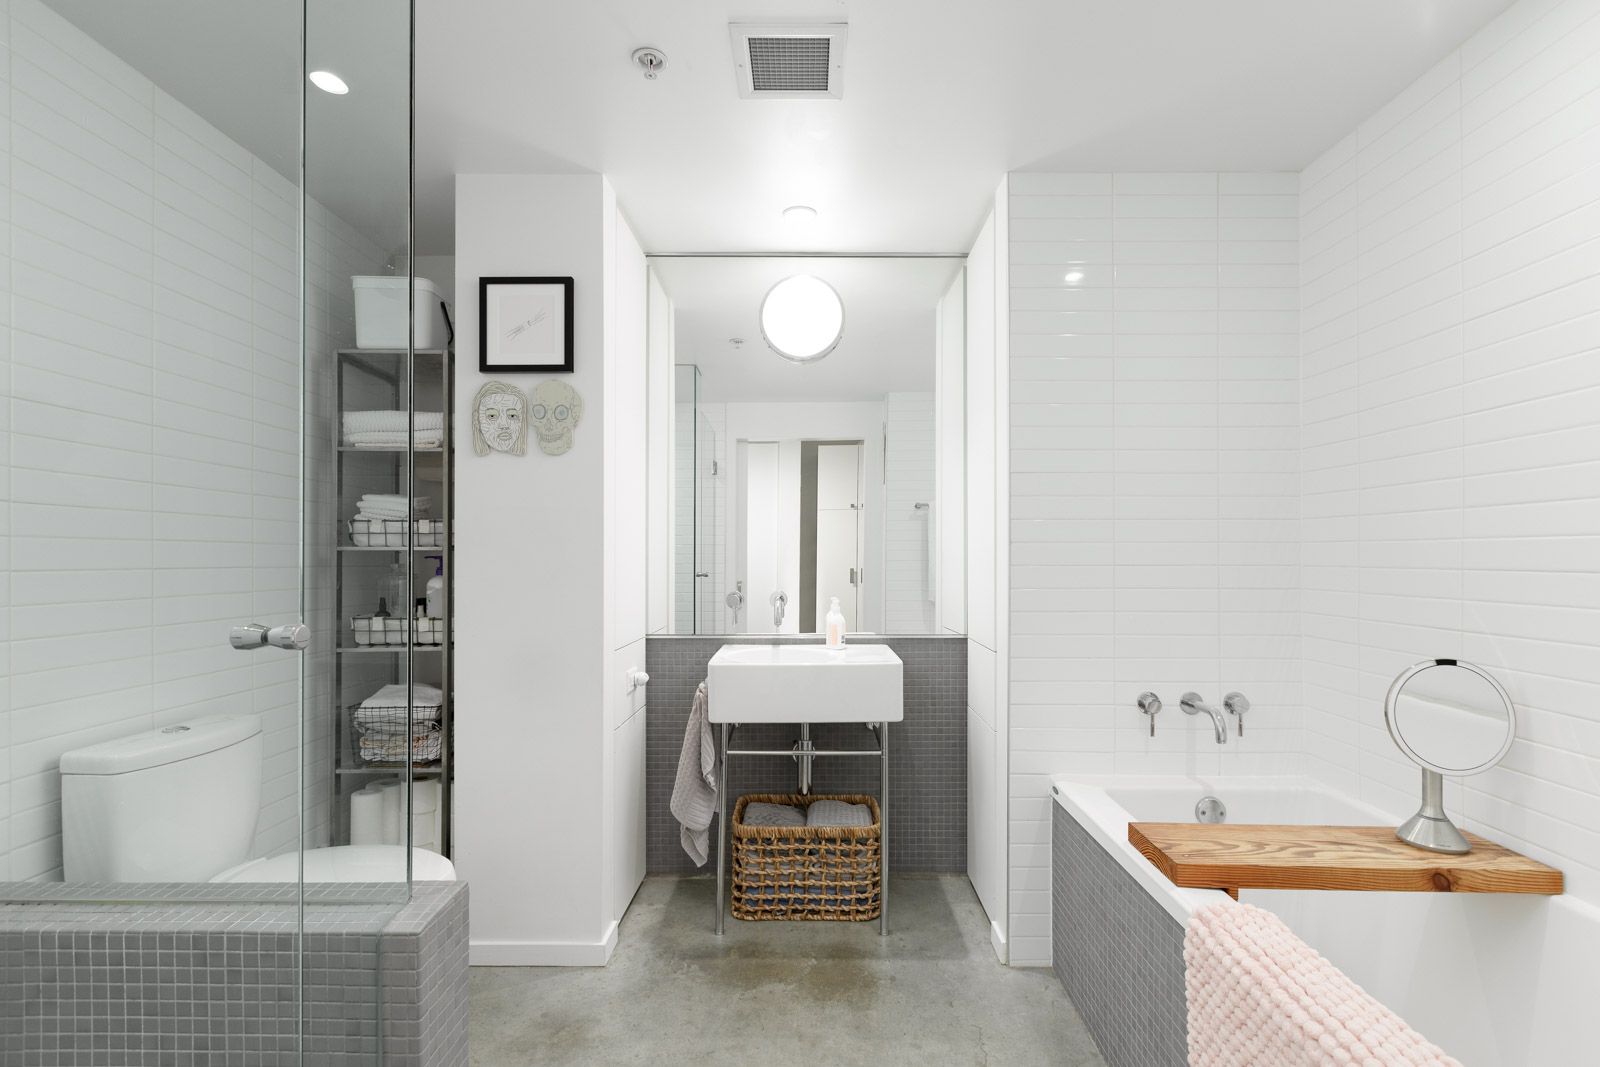 sleek bathroom with modern light fixtures and appliances, with hidden storage to the far left and bathtub to the far right in a rental condo provided by Birds Nest Properties in Vancouver